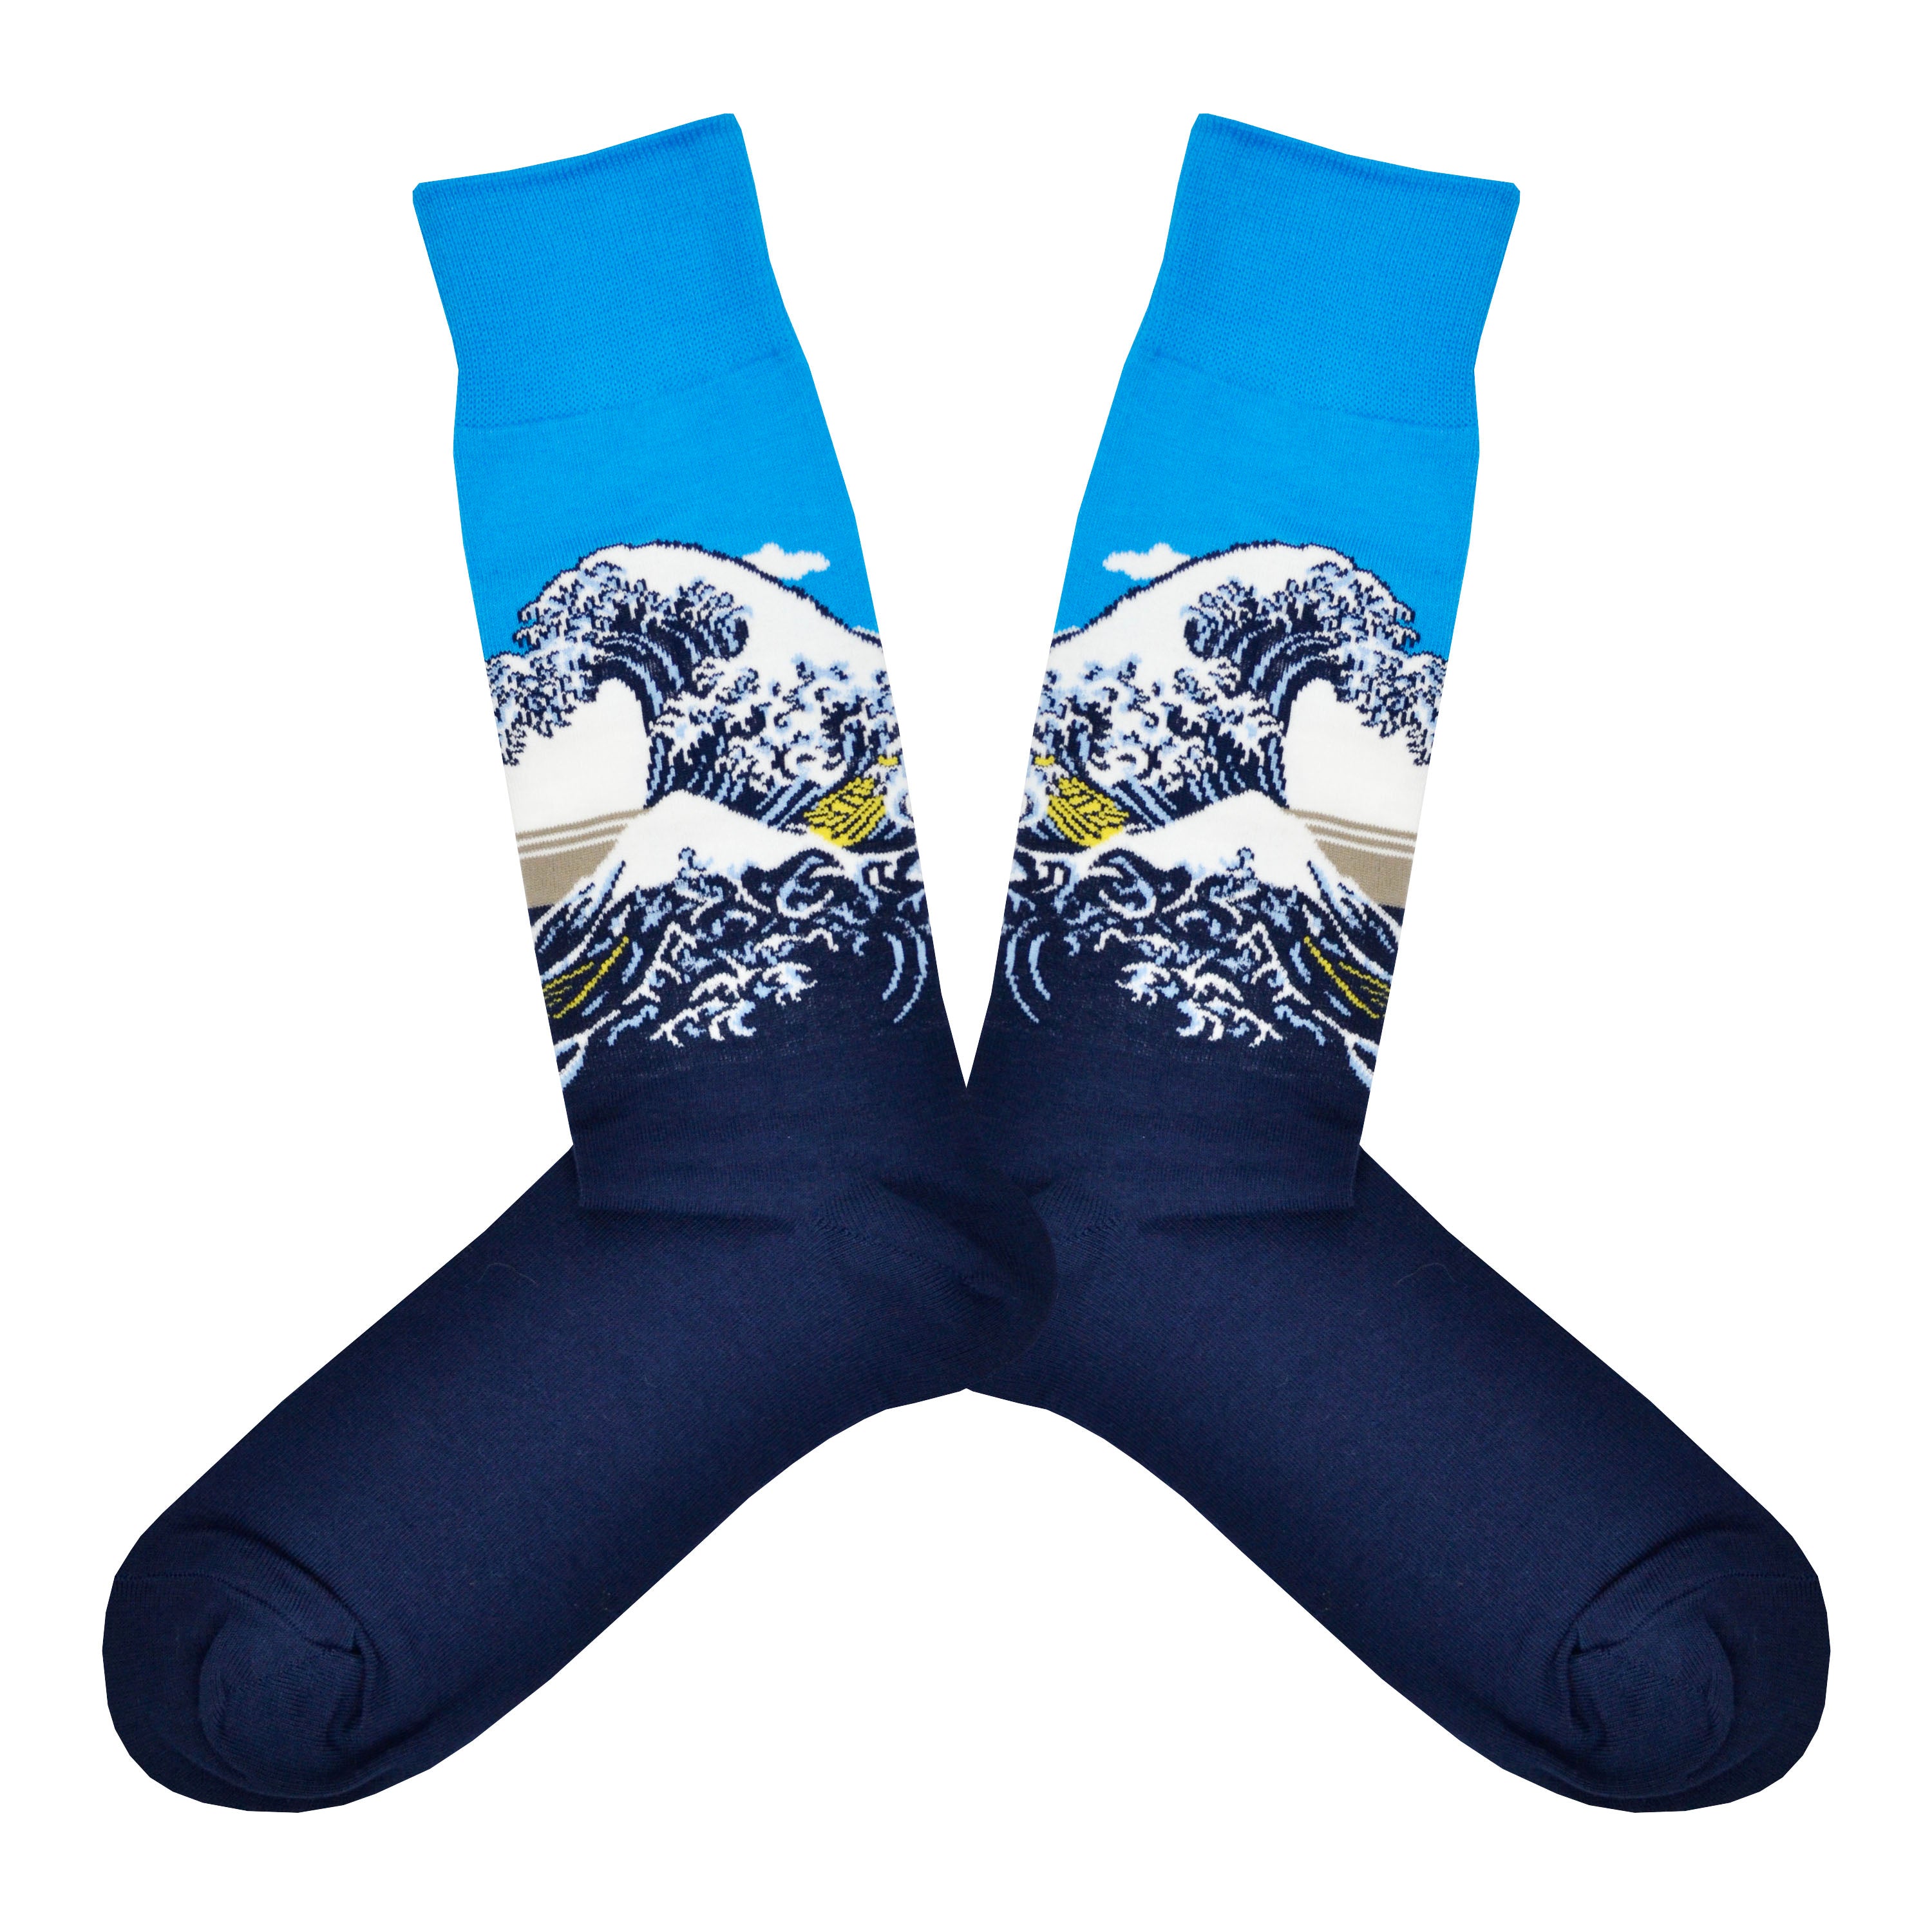 These blue cotton men's crew socks by the brand Hot Sox feature the famous print The Great Wave by the Japanese artist Hokusai.